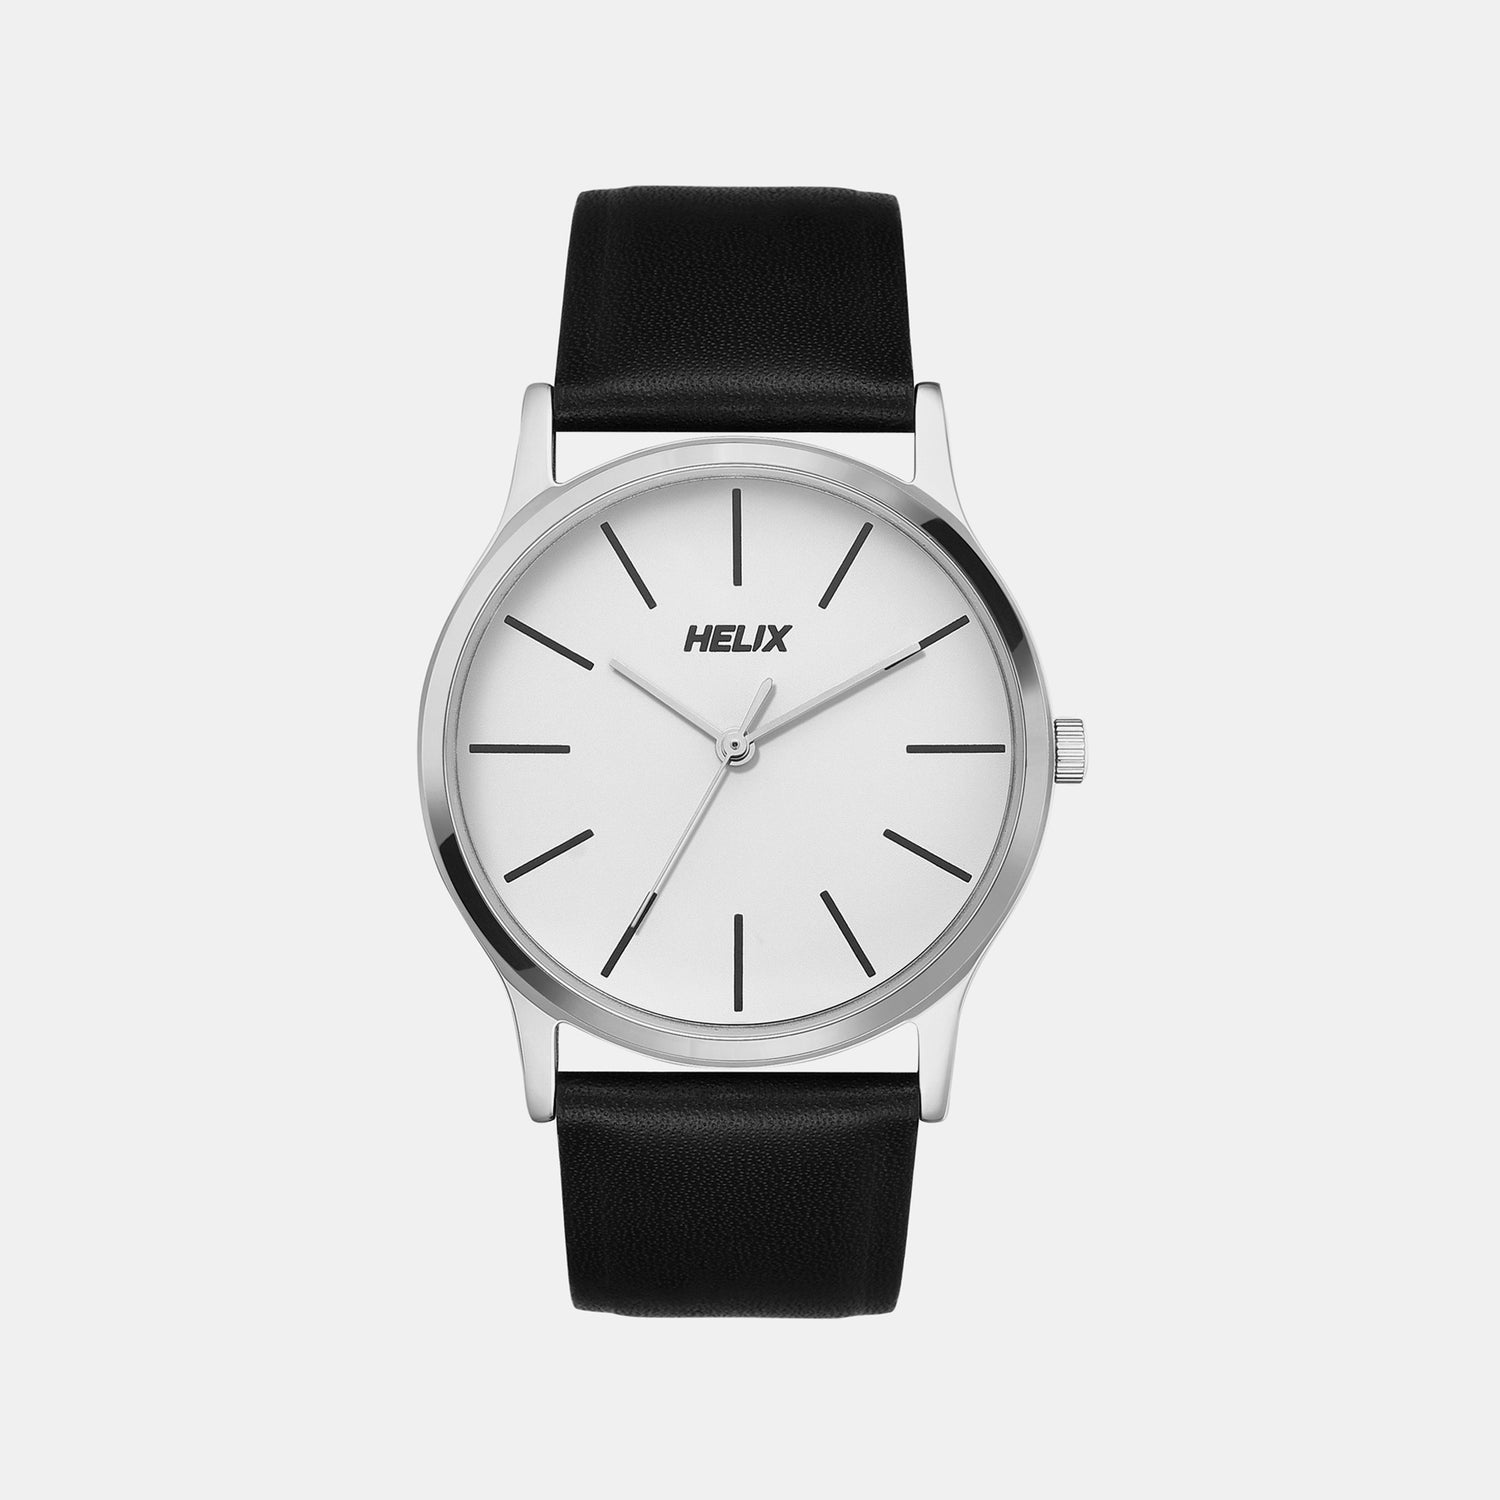 Male White Analog Leather Watch TW054HG00